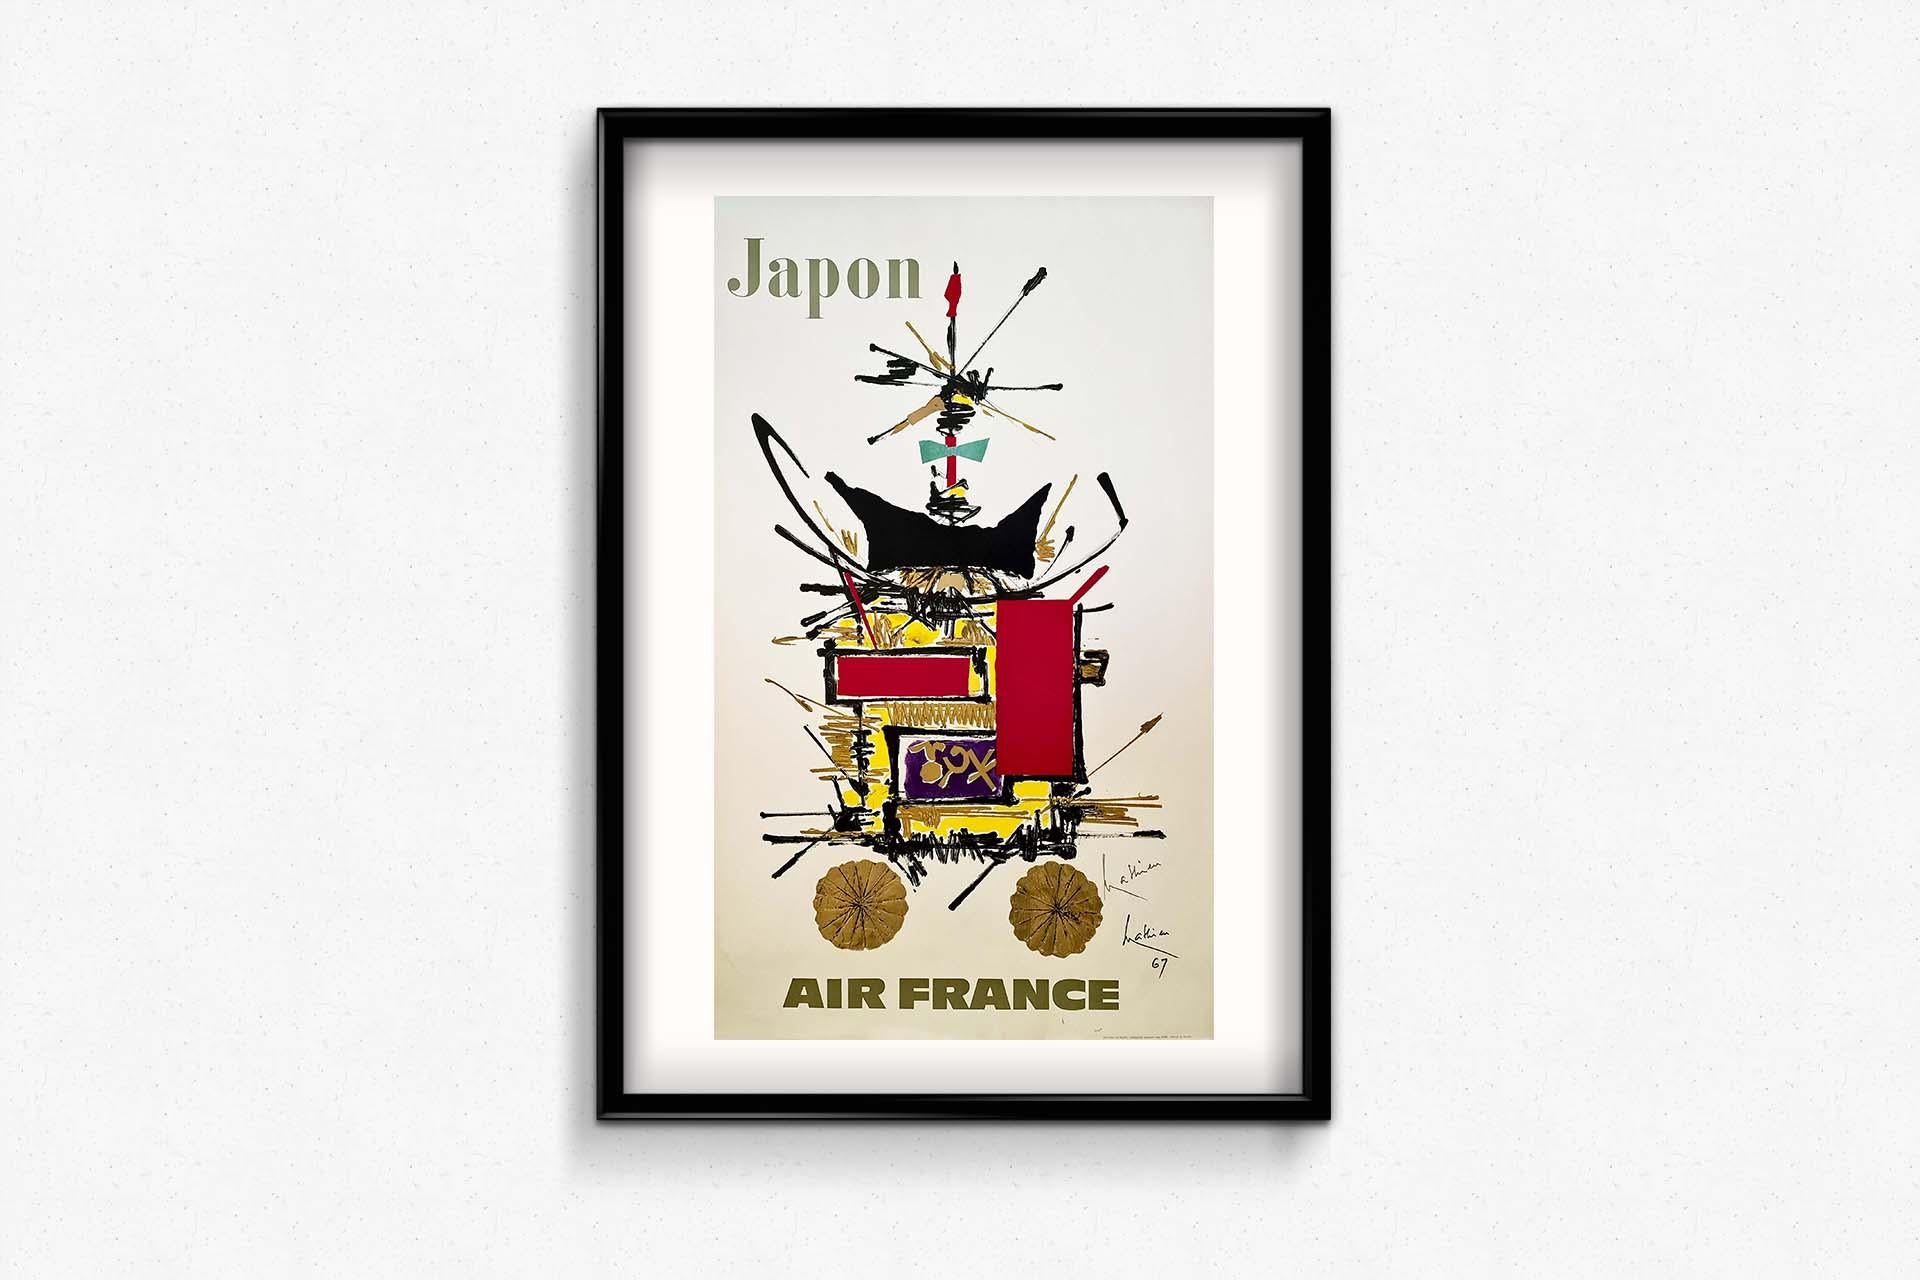 1967 original poster hand signed by the artist Japan Air France Airline Tourism For Sale 1